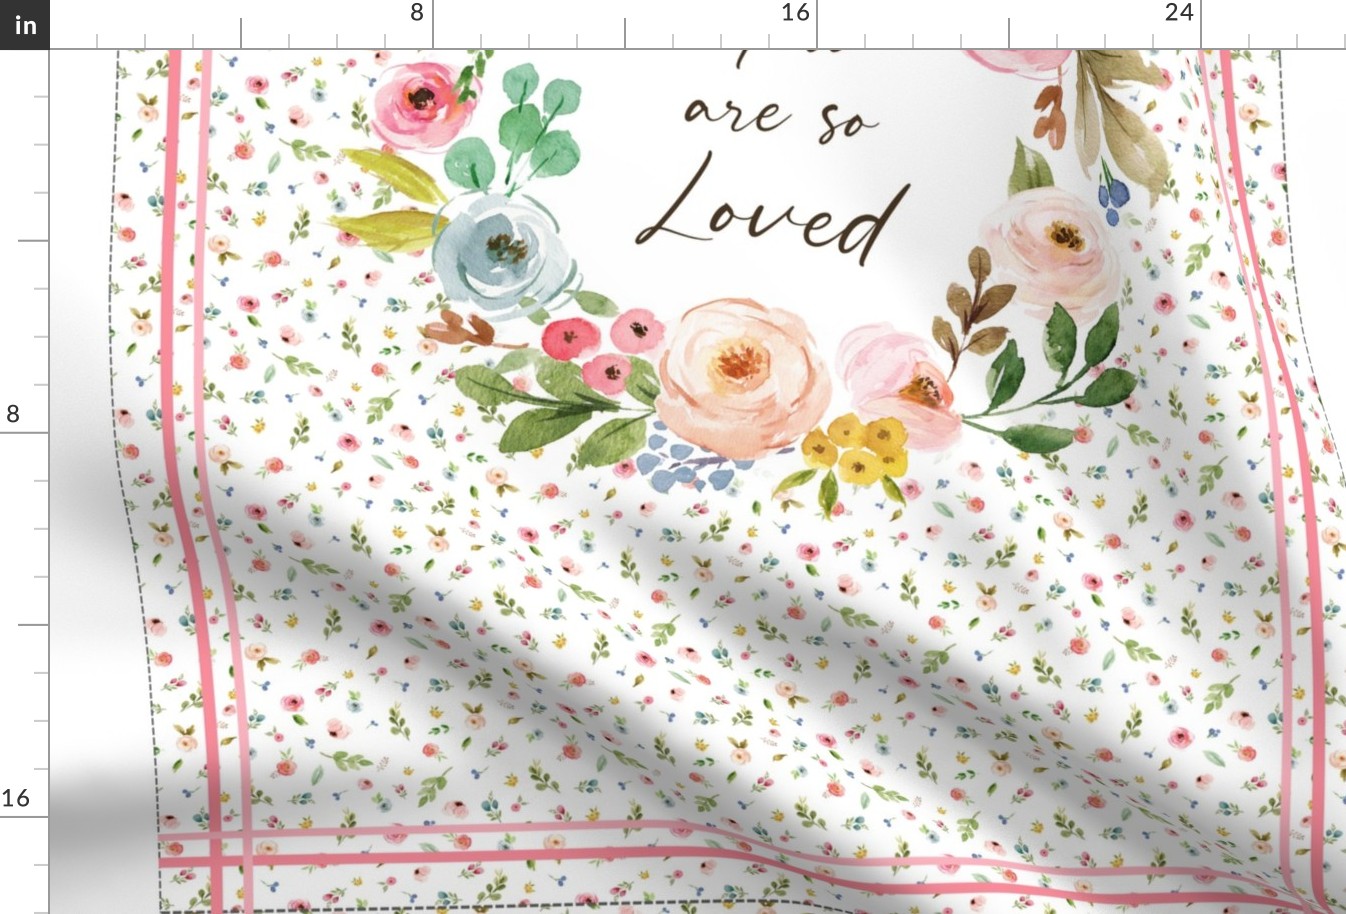 54” x 36” MINKY You are so Loved Blanket Panel- Floral Wreath Panel- Woodland Pink Blush Peach Blue Flowers, FABRIC MUST be 54” or WIDER, Two 24” x 36” panels per yard